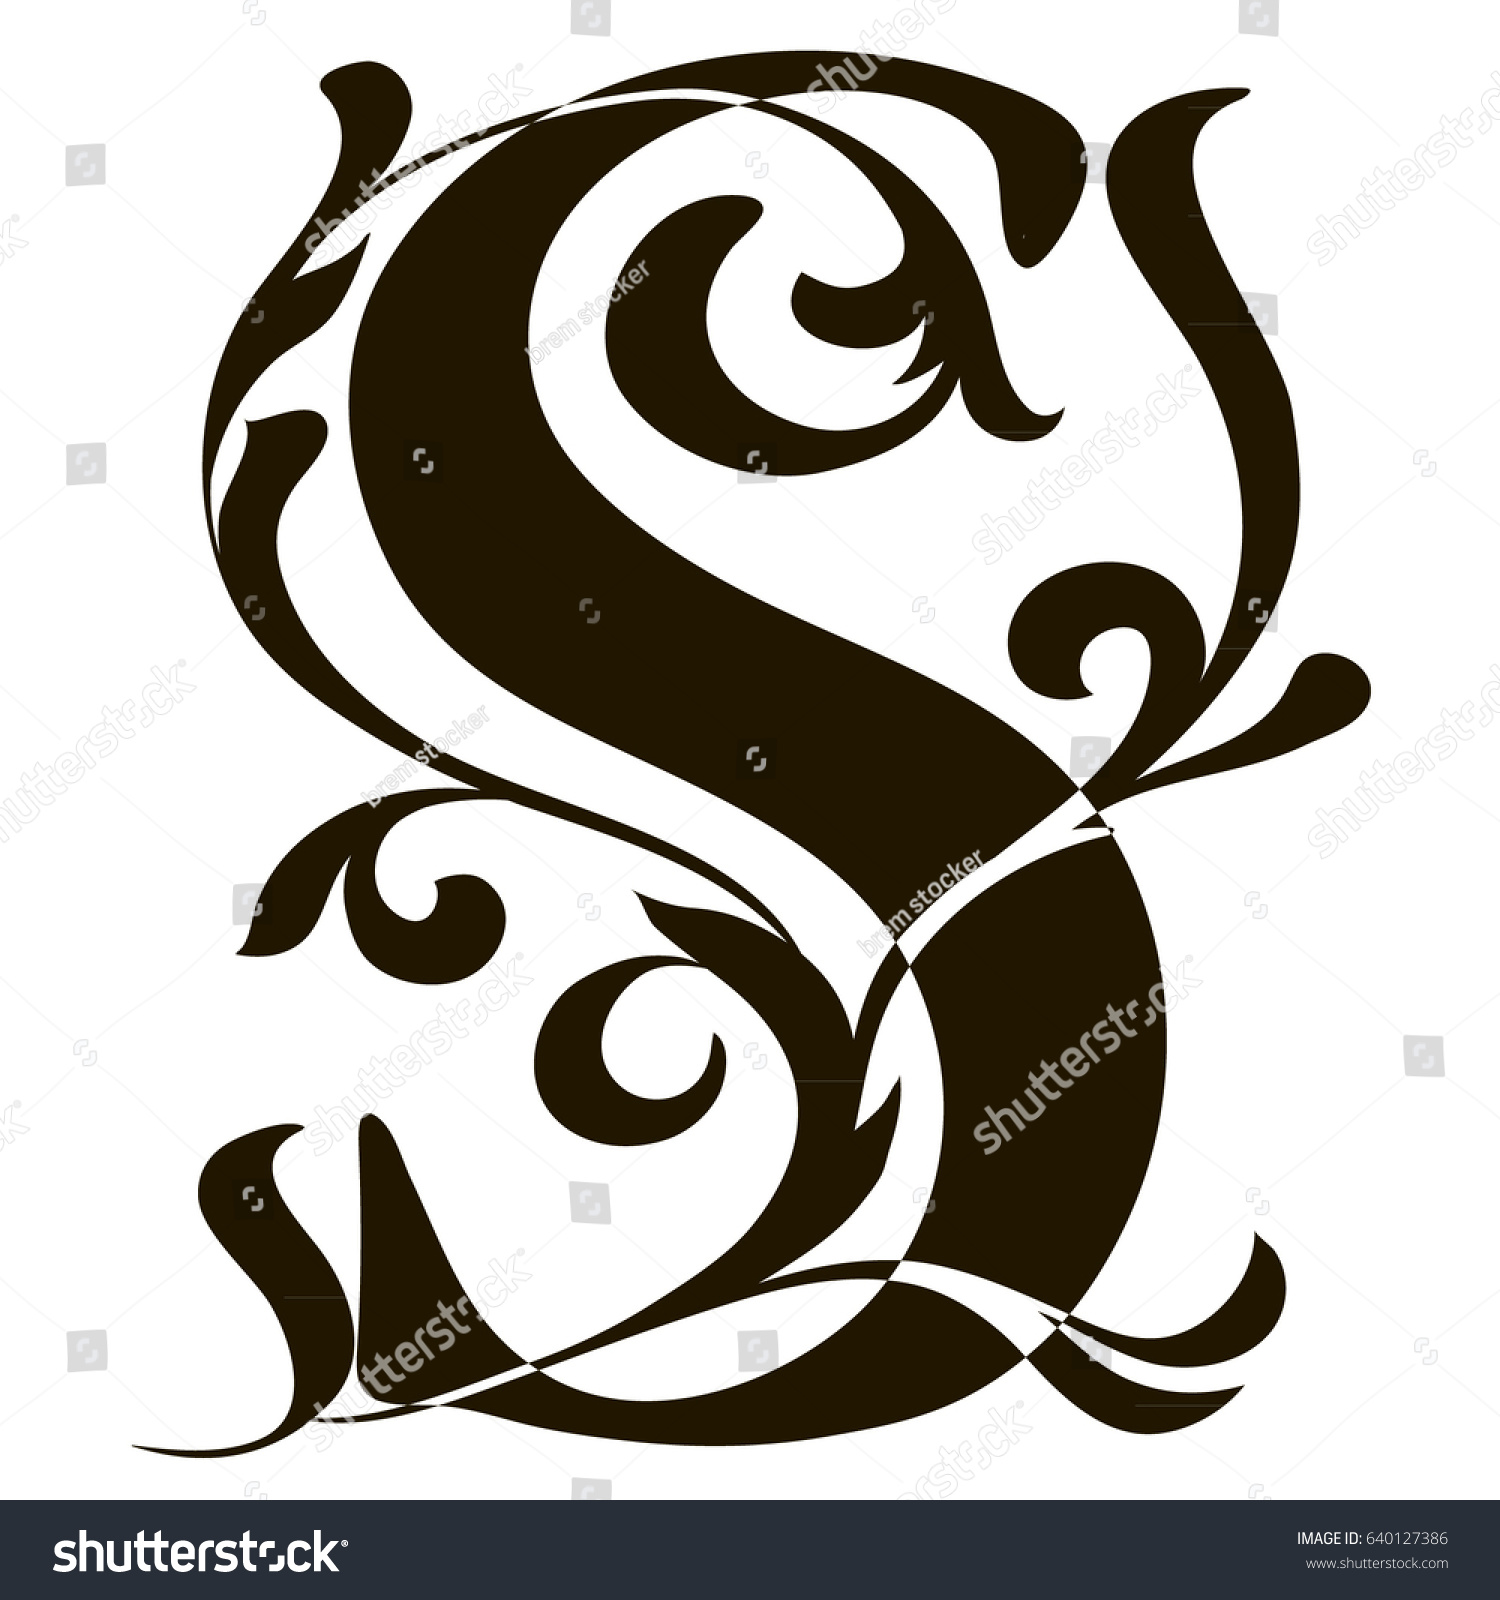 Ornate capital letters Images, Stock Photos & Vectors | Shutterstock